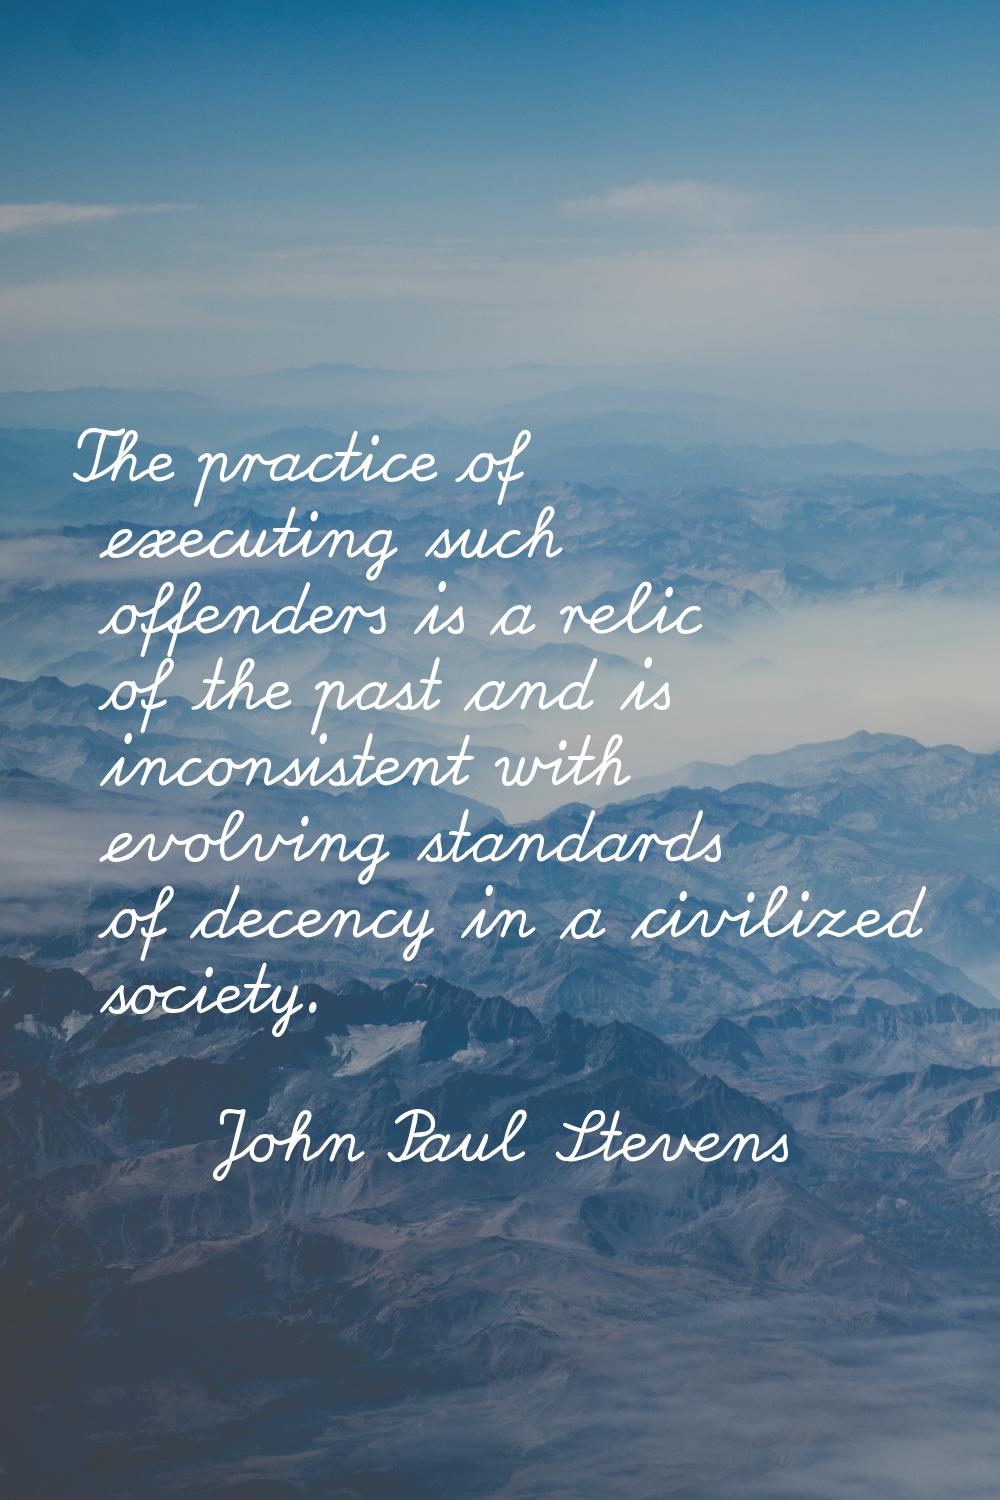 The practice of executing such offenders is a relic of the past and is inconsistent with evolving s